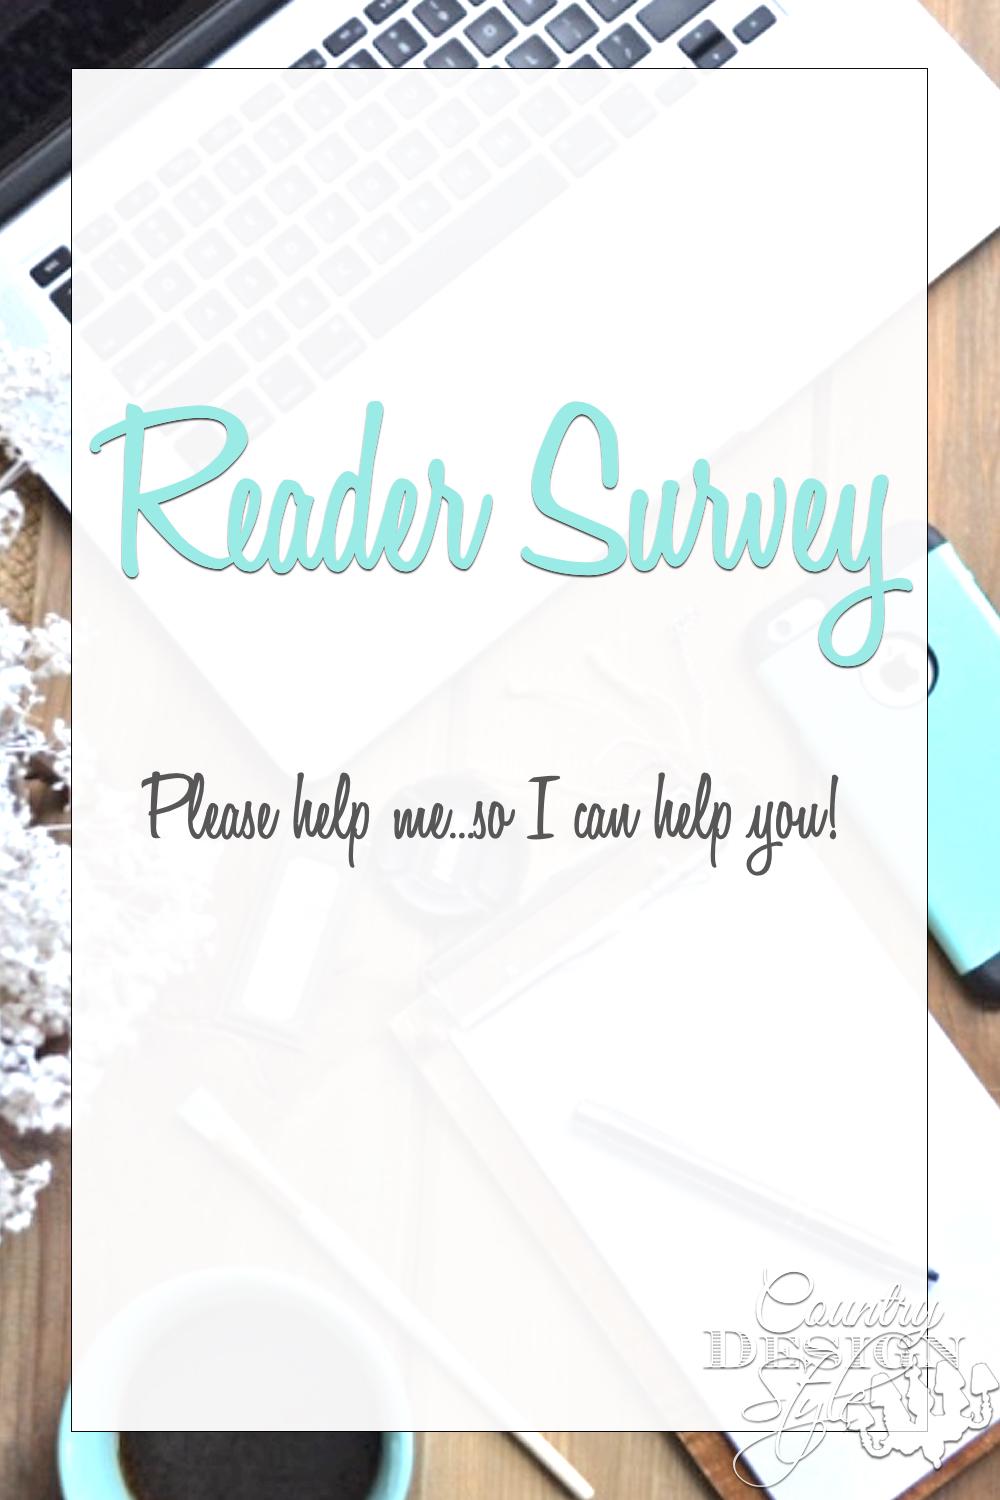 Reader DIY Survey | Pn | Country Design Style | countrydesignstyle.com